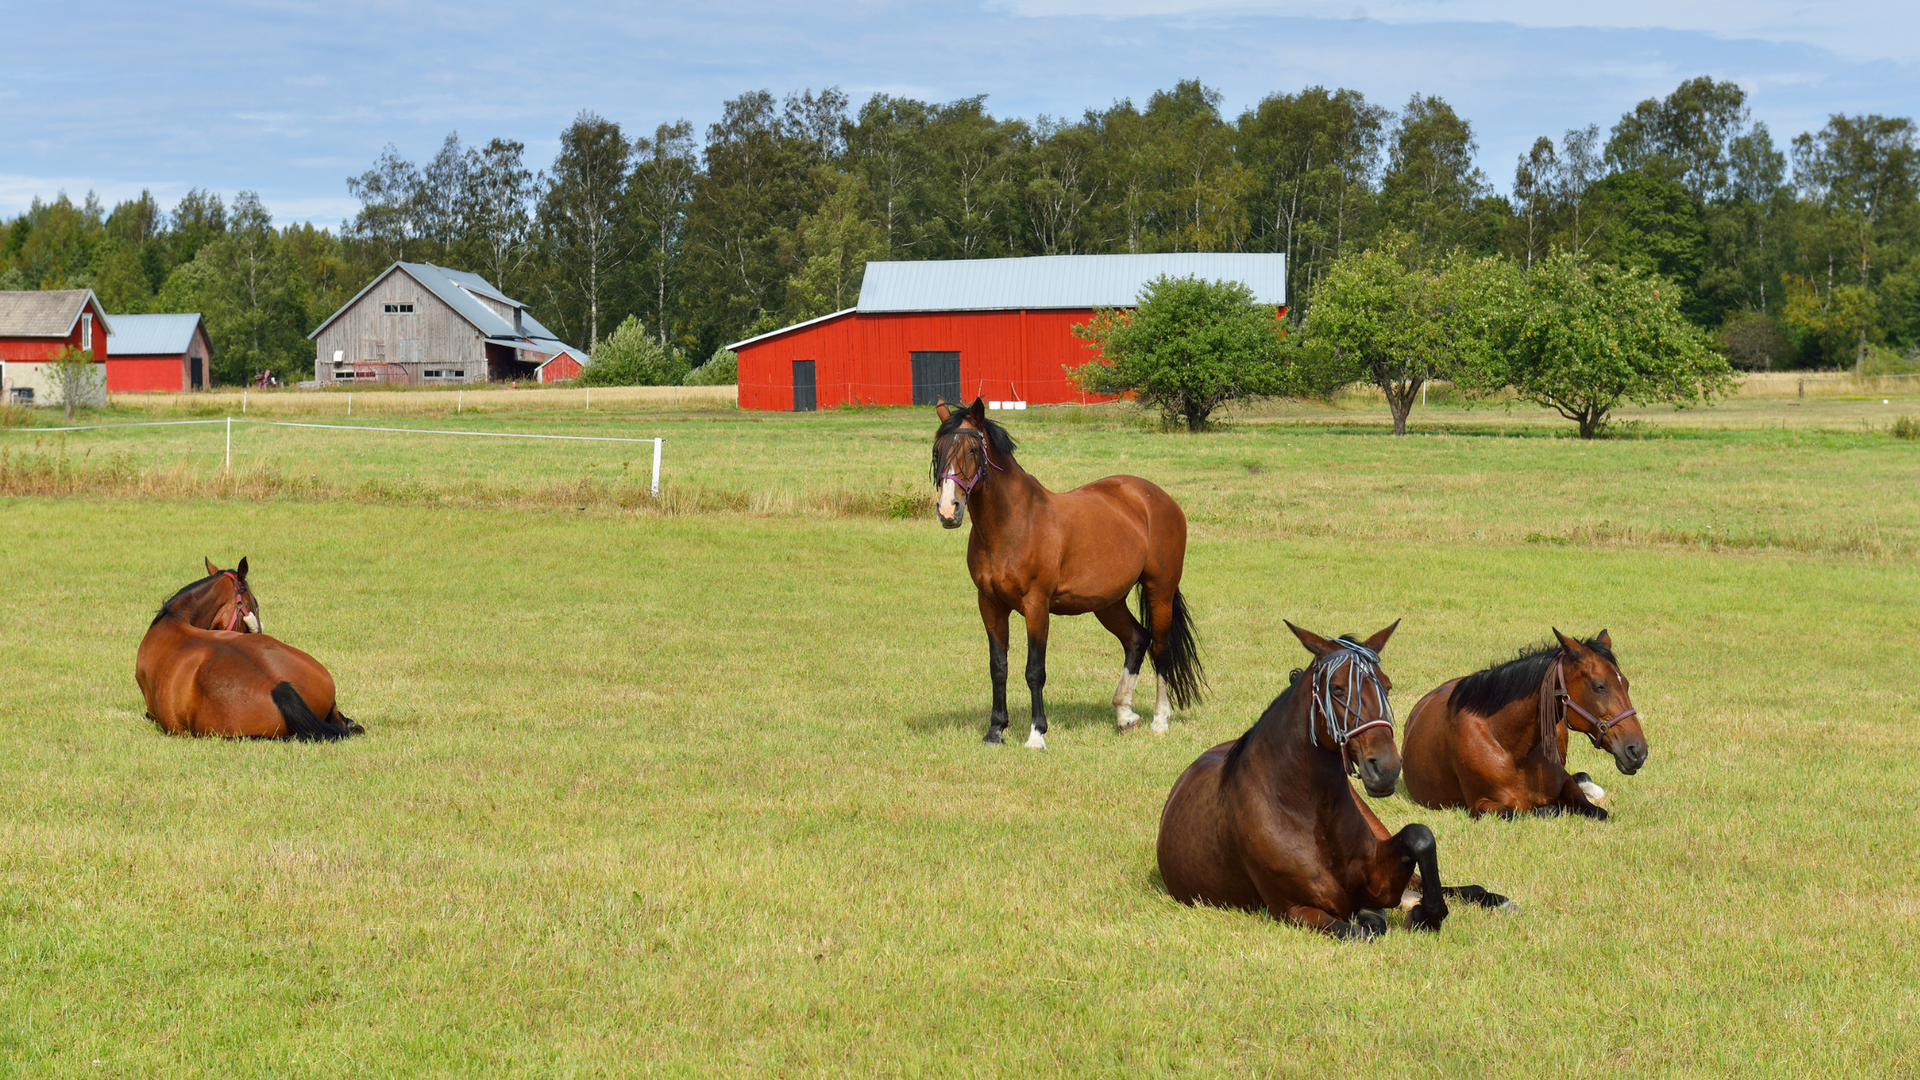 3 horses laying down in field with 1 horse standing. 